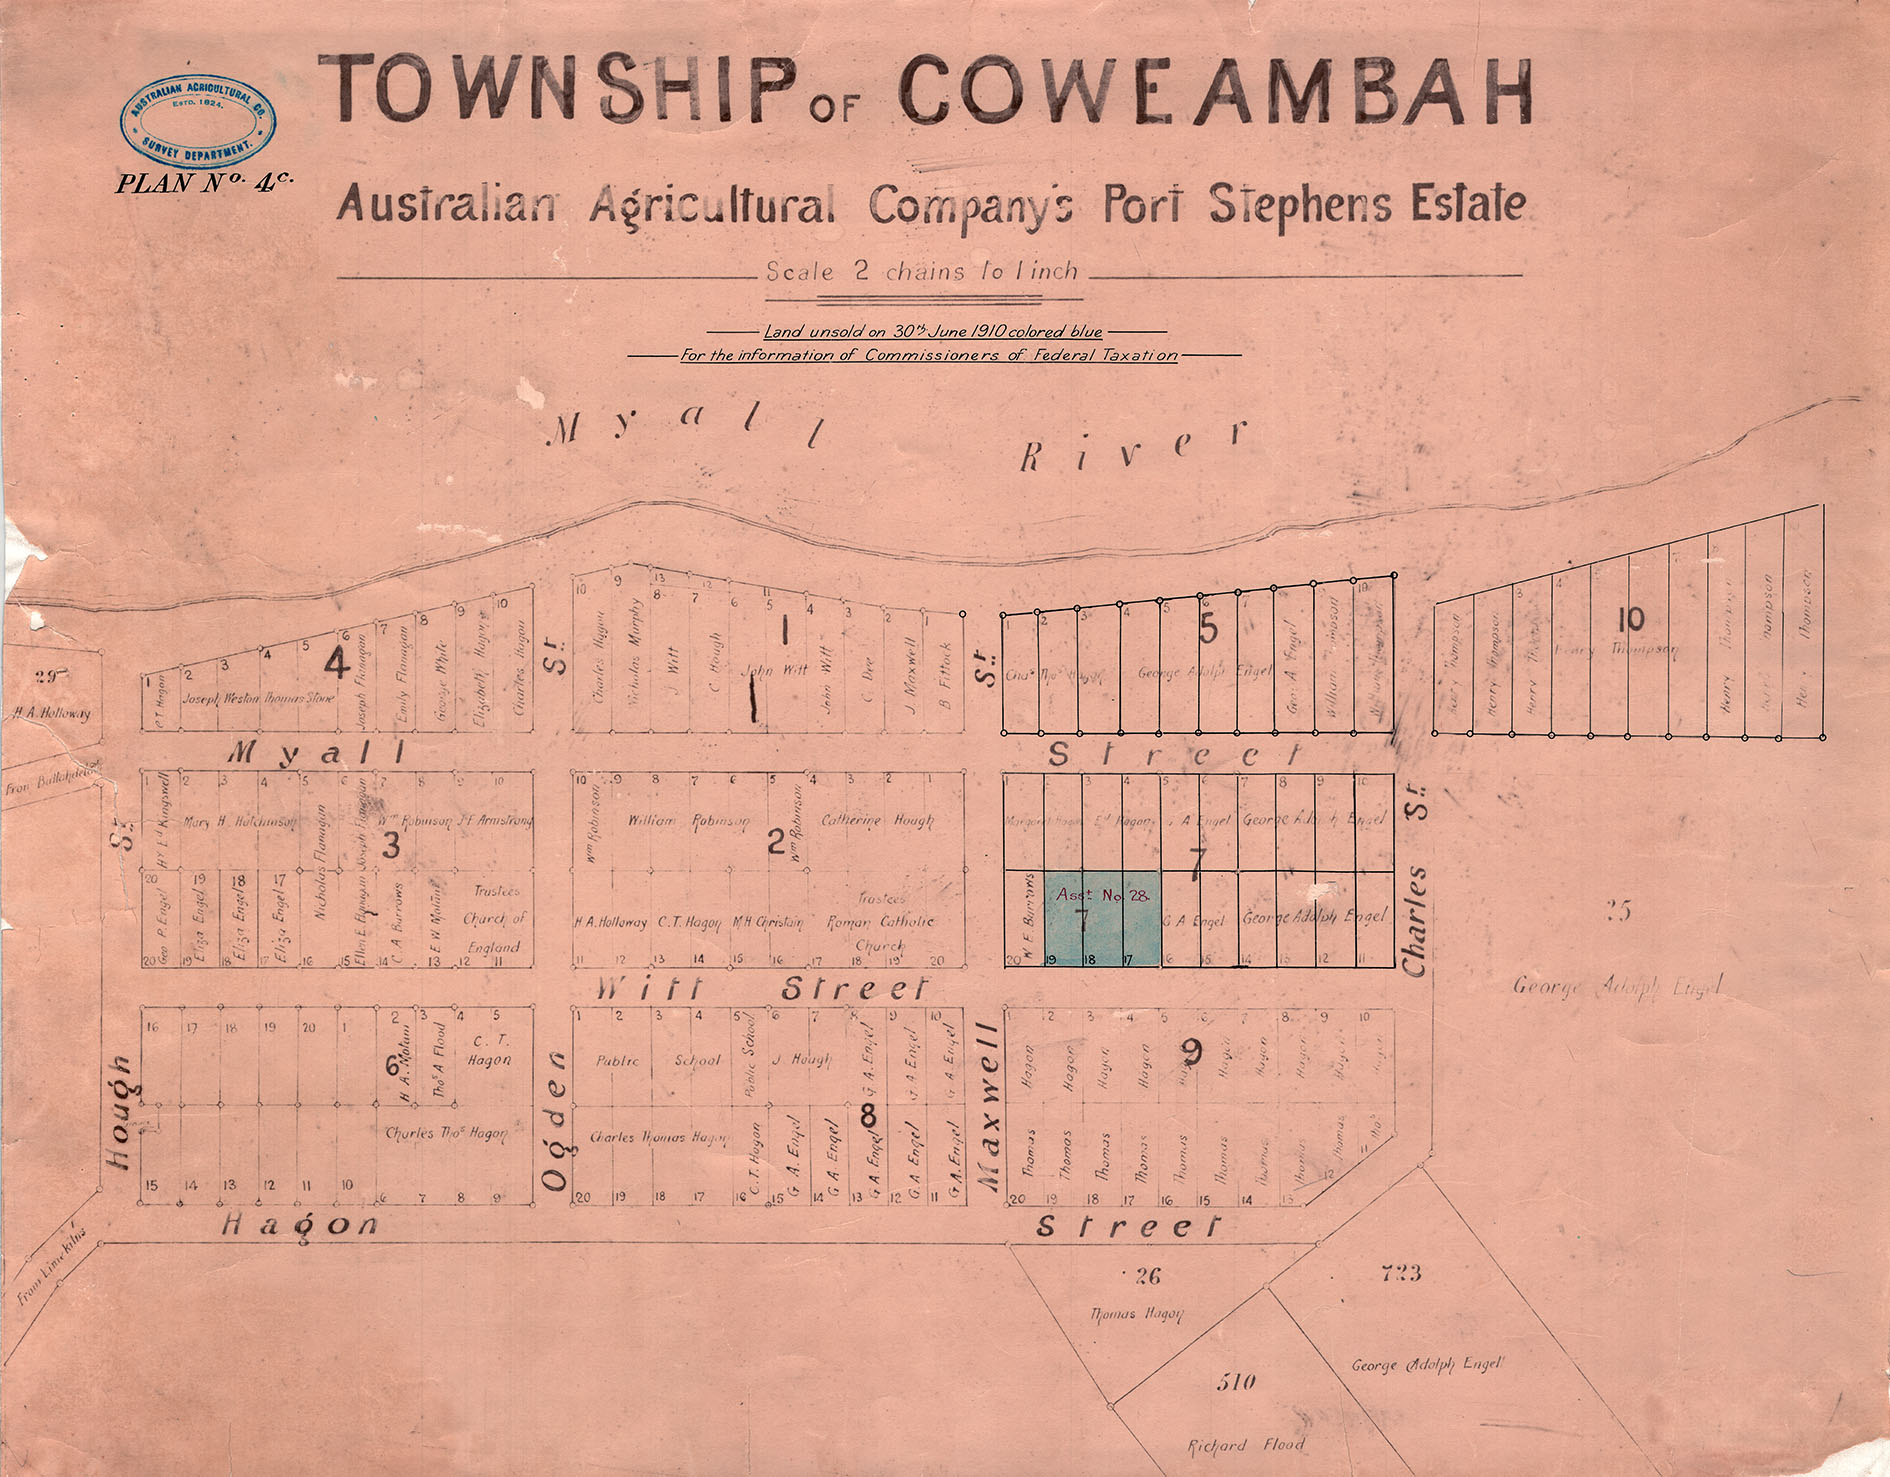 Plan of the township of Coweambah (Tea Gardens), Port Stephens Estate, New South Wales, undated (B47).